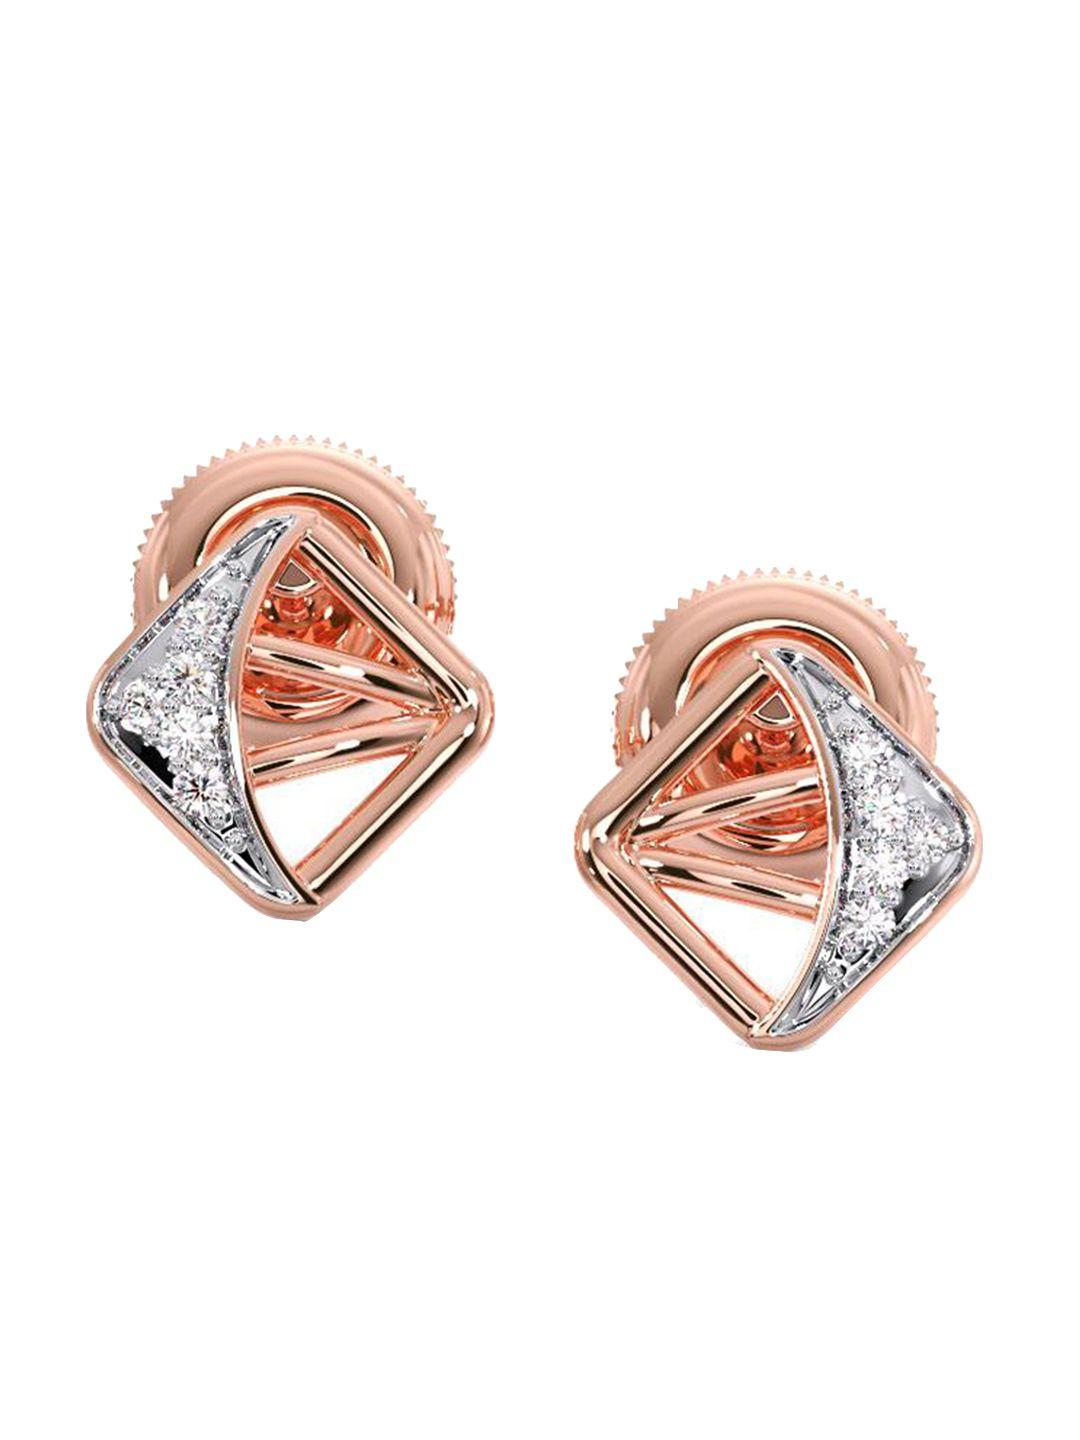 candere a kalyan jewellers company diamond-studded 14kt rose gold stud earrings - 0.6 gm